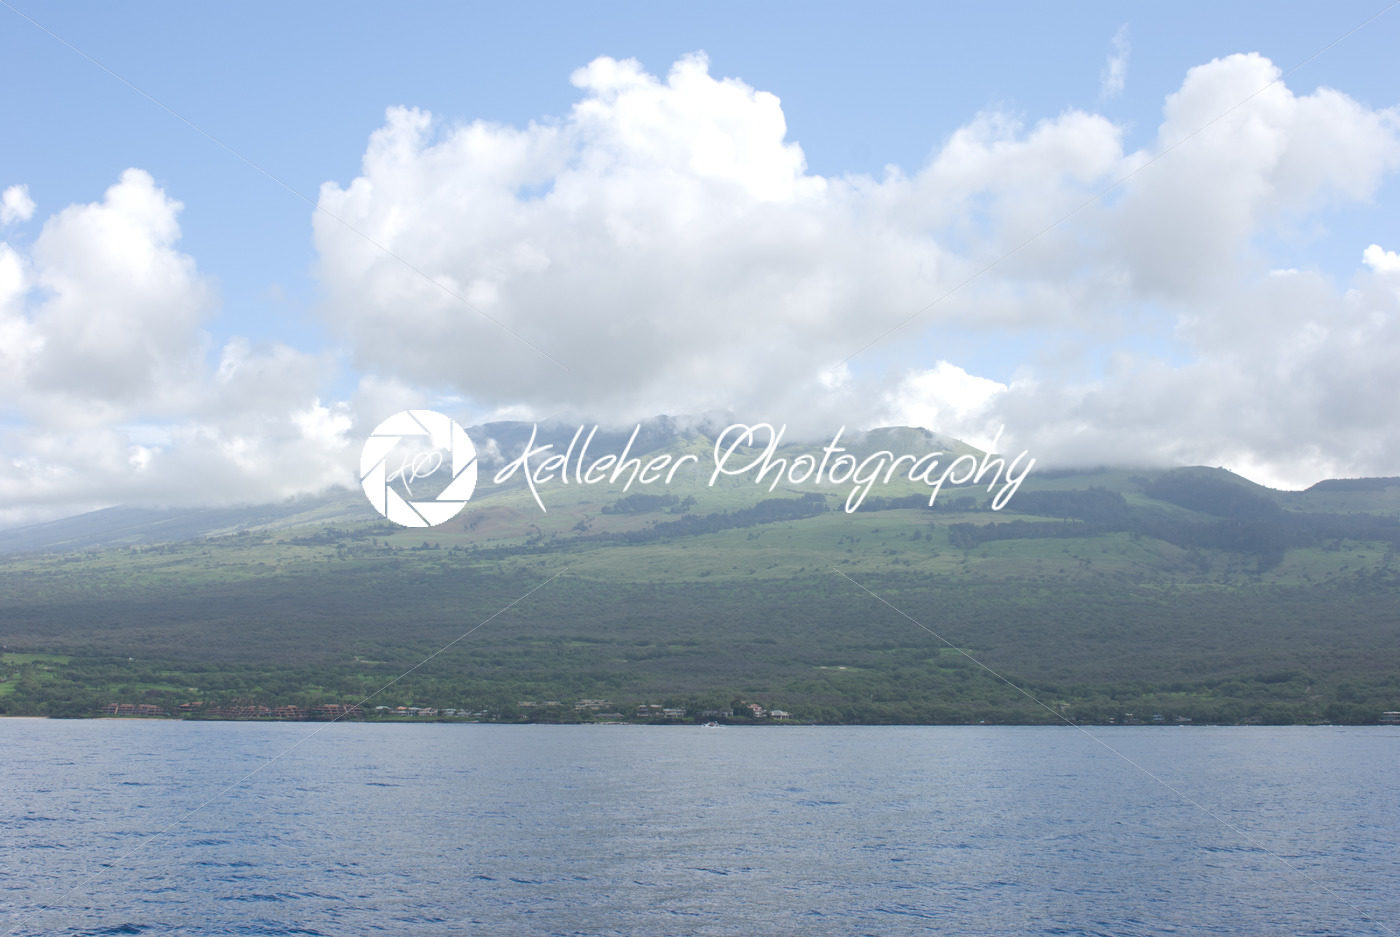 Maui with Molokini Crater. Molokini is popular for scuba diving and snorkeling - Kelleher Photography Store